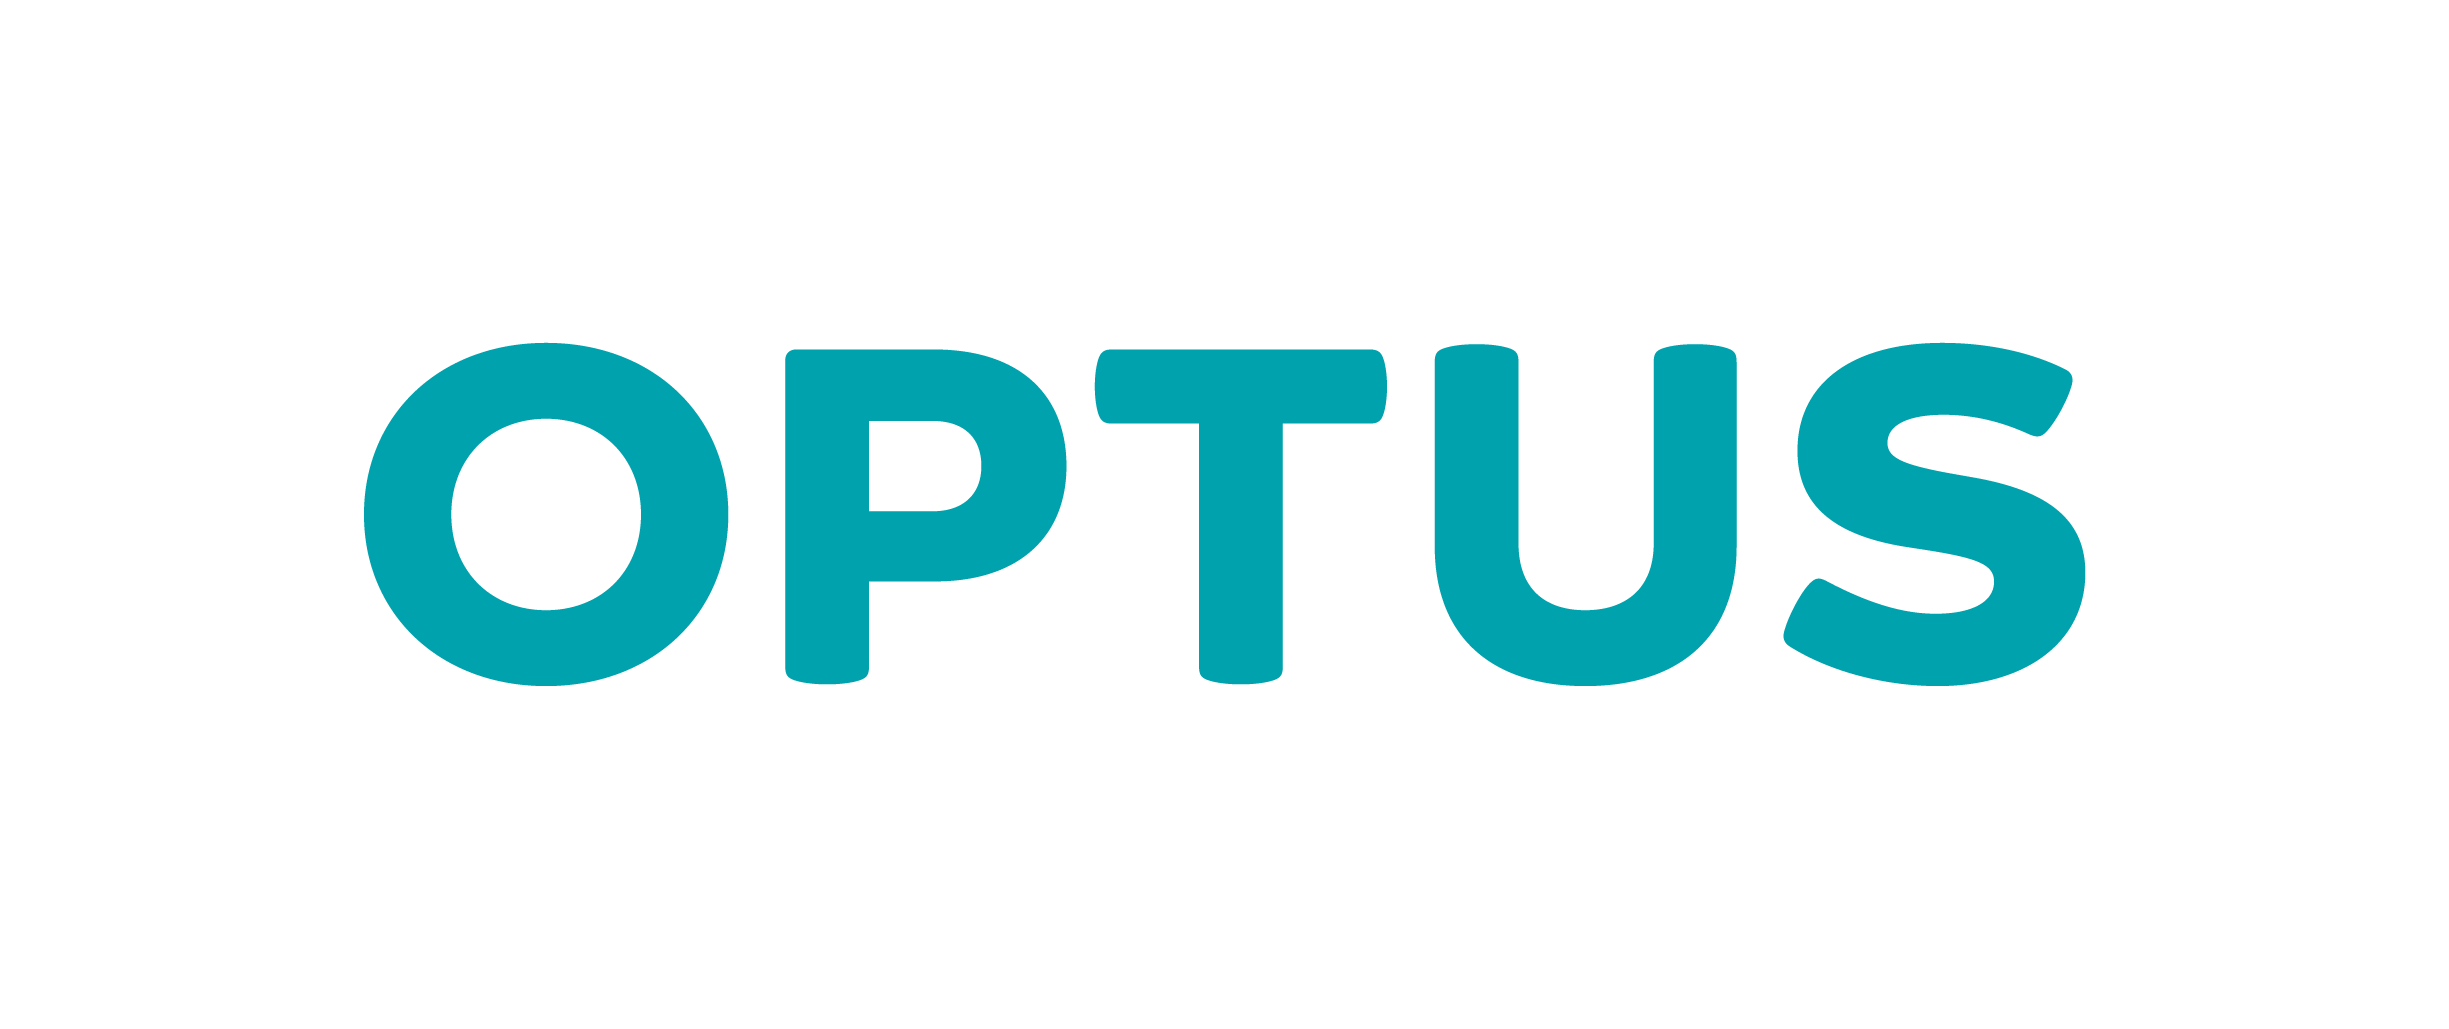 OPTUS_Teal_sRGB_RELEASE_03_310316.png